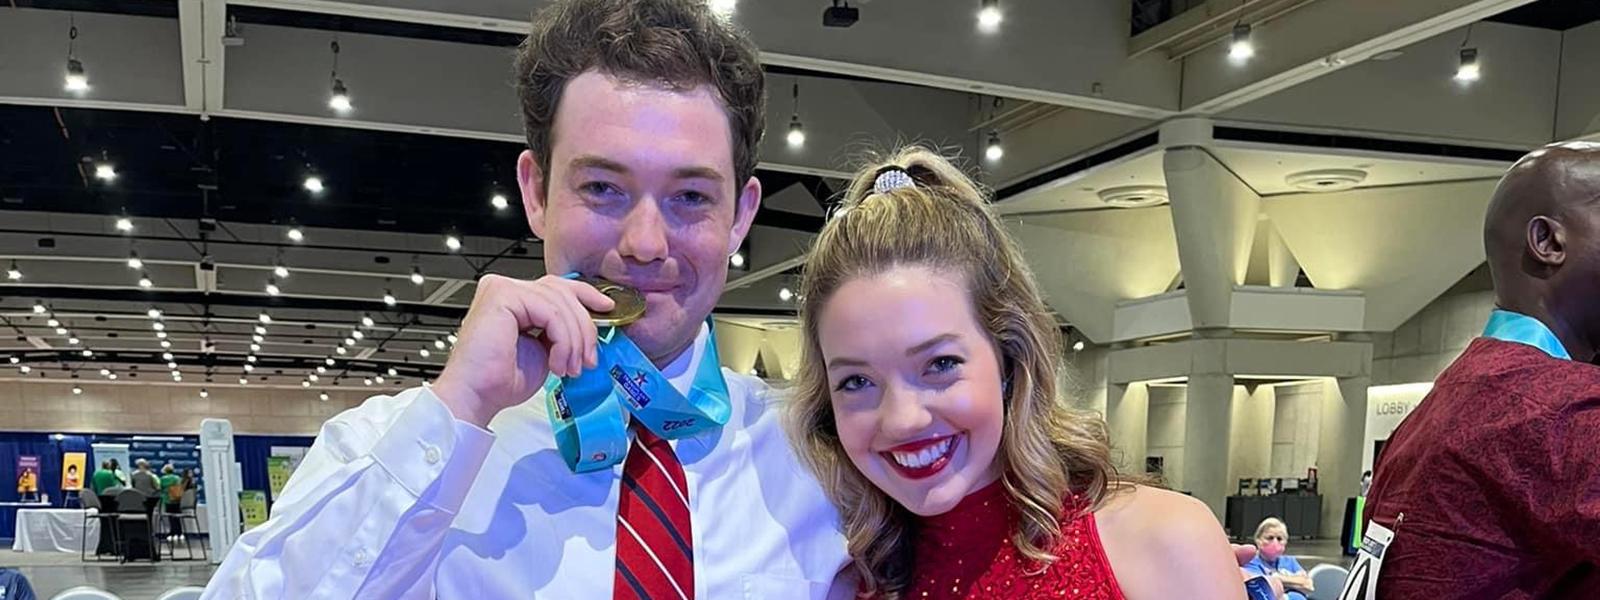 Taylor Novinger and his sister Abbey after winning gold in the dance competition . (Photo provided)